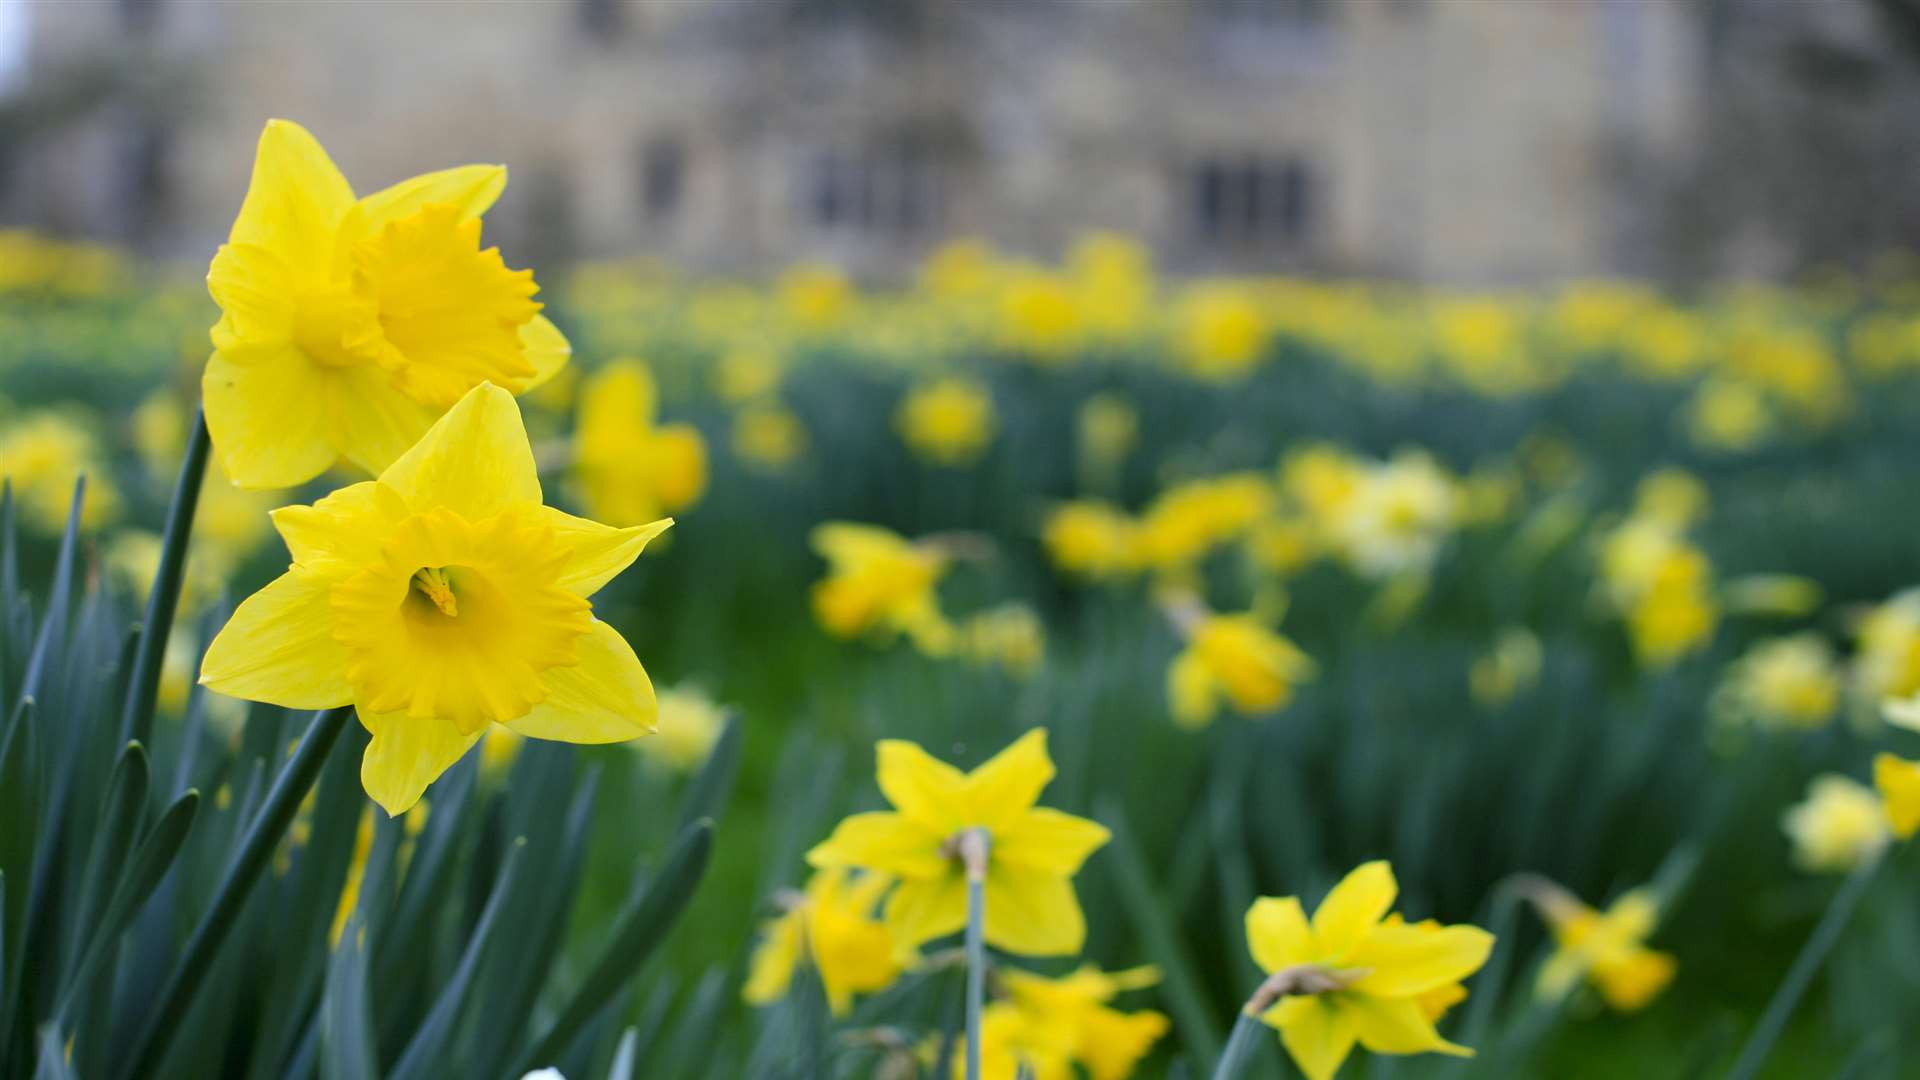 Daffodils will be dazzling at Hever Castle